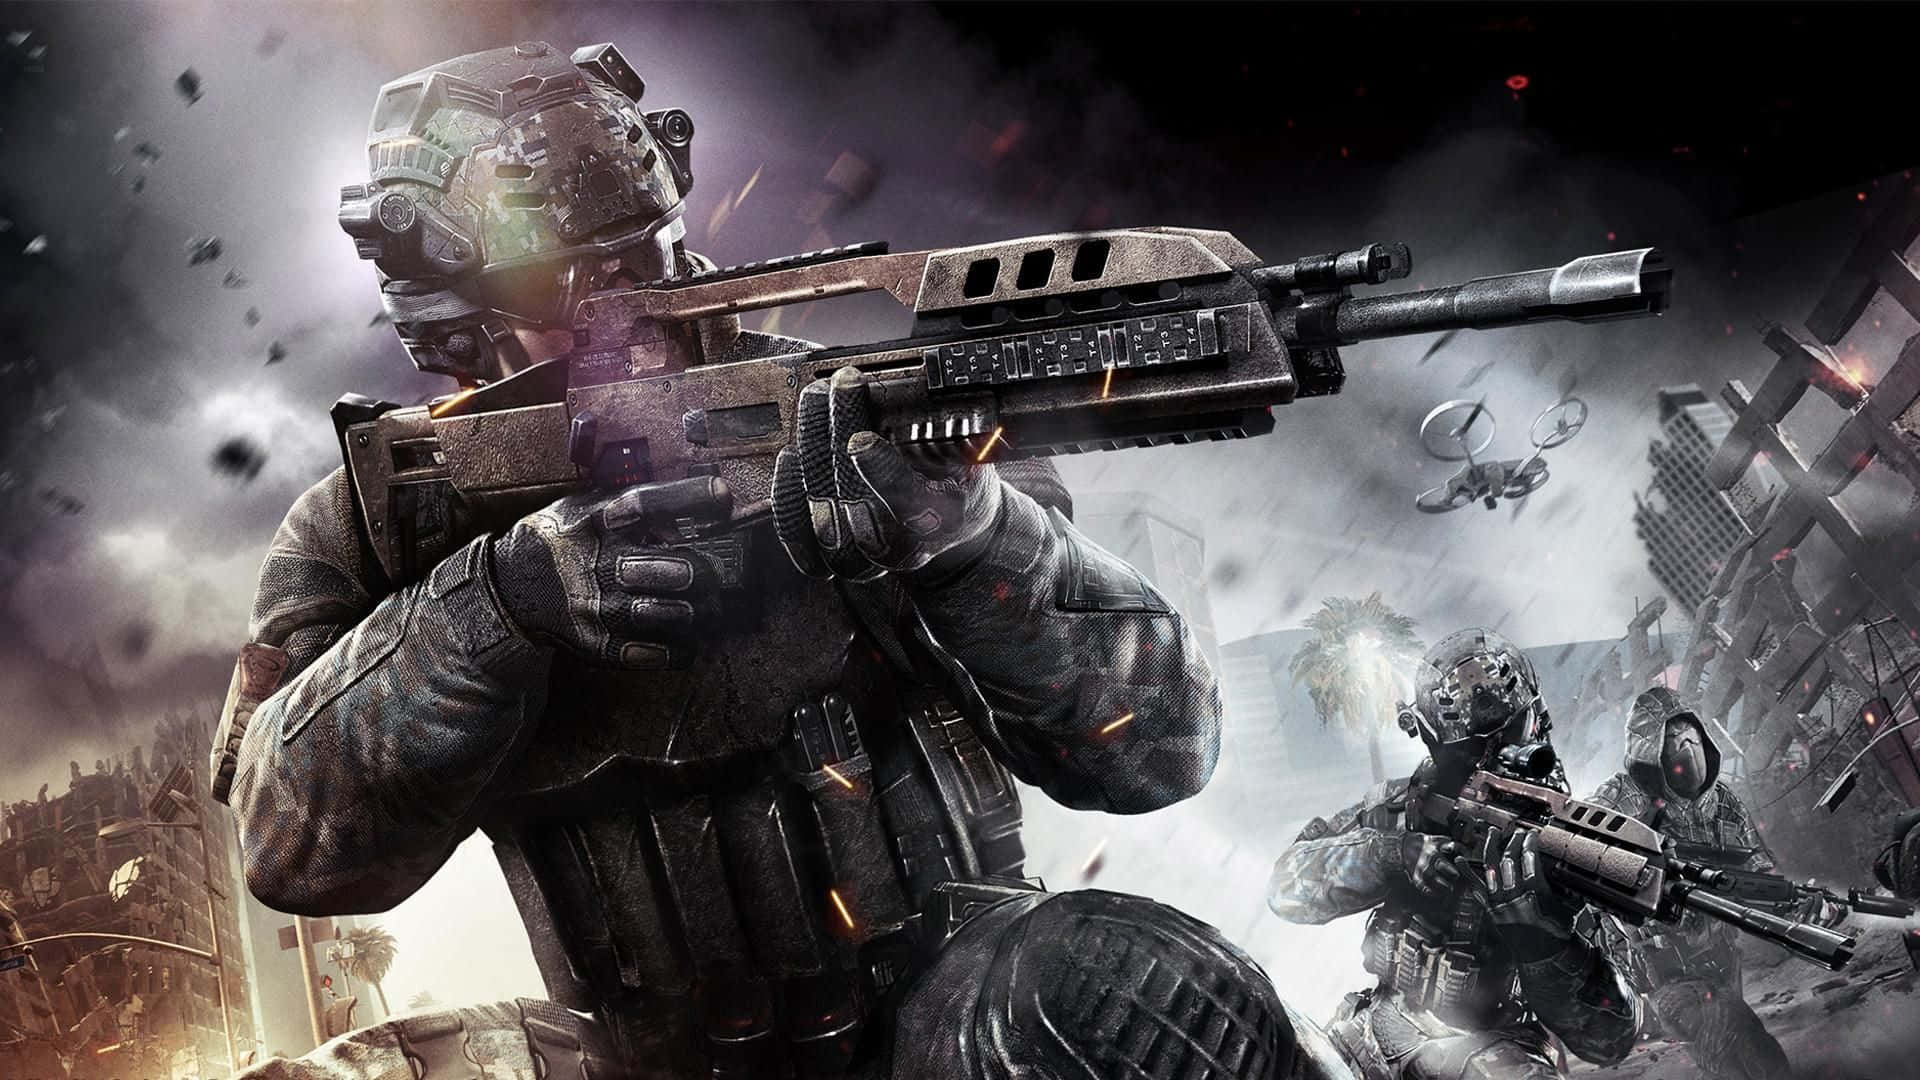 Aim, blast and survive in the world of first-person shooter games! Wallpaper